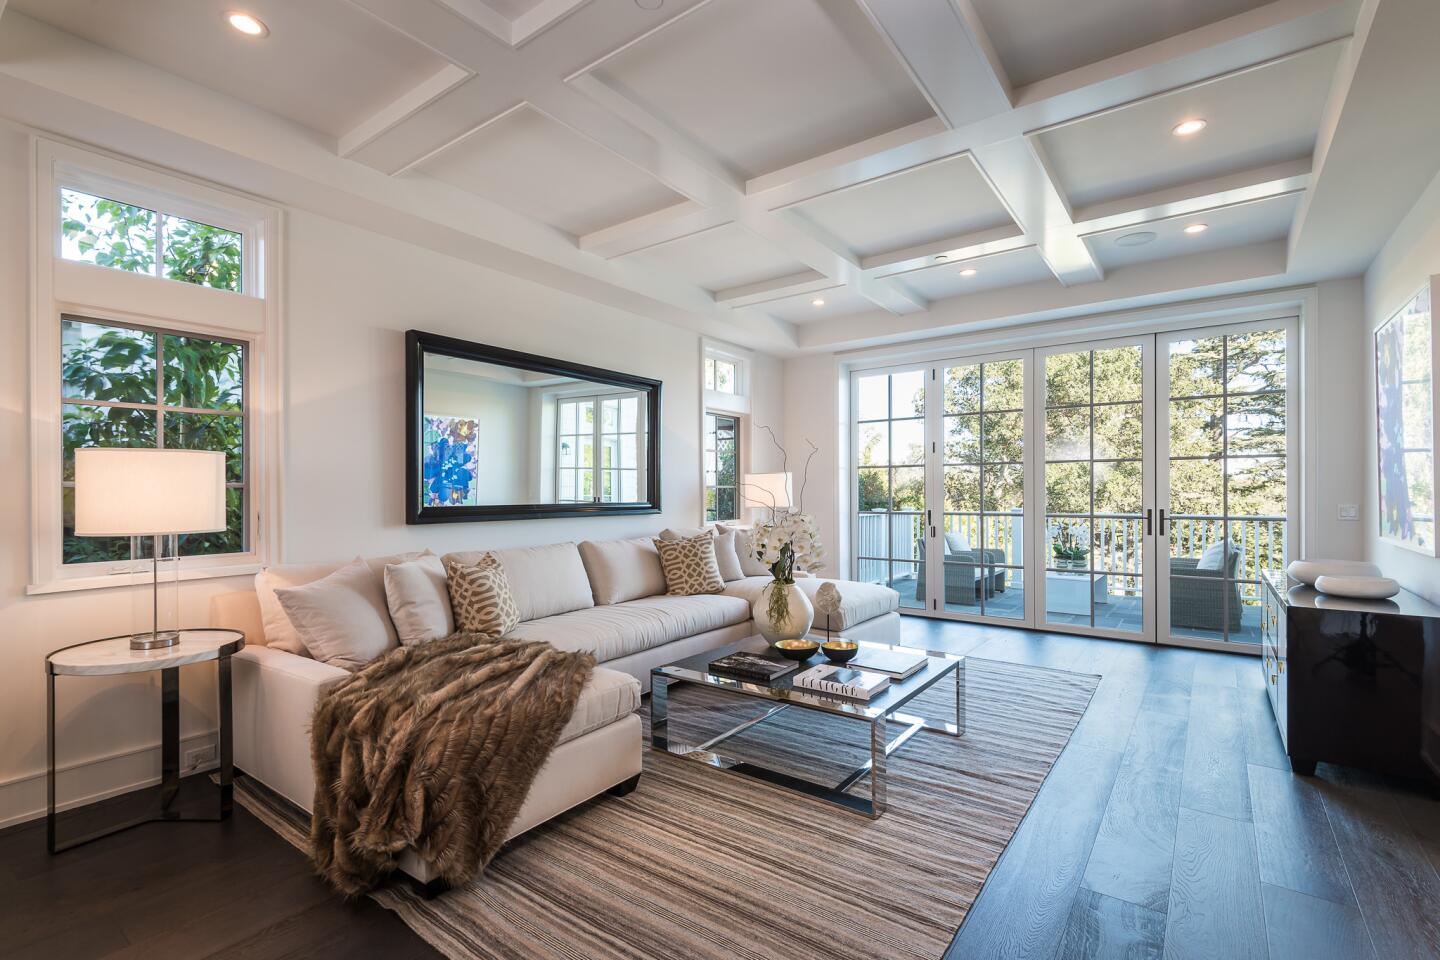 The newly built Traditional-style home has a high-ceiling foyer that takes in canyon views.